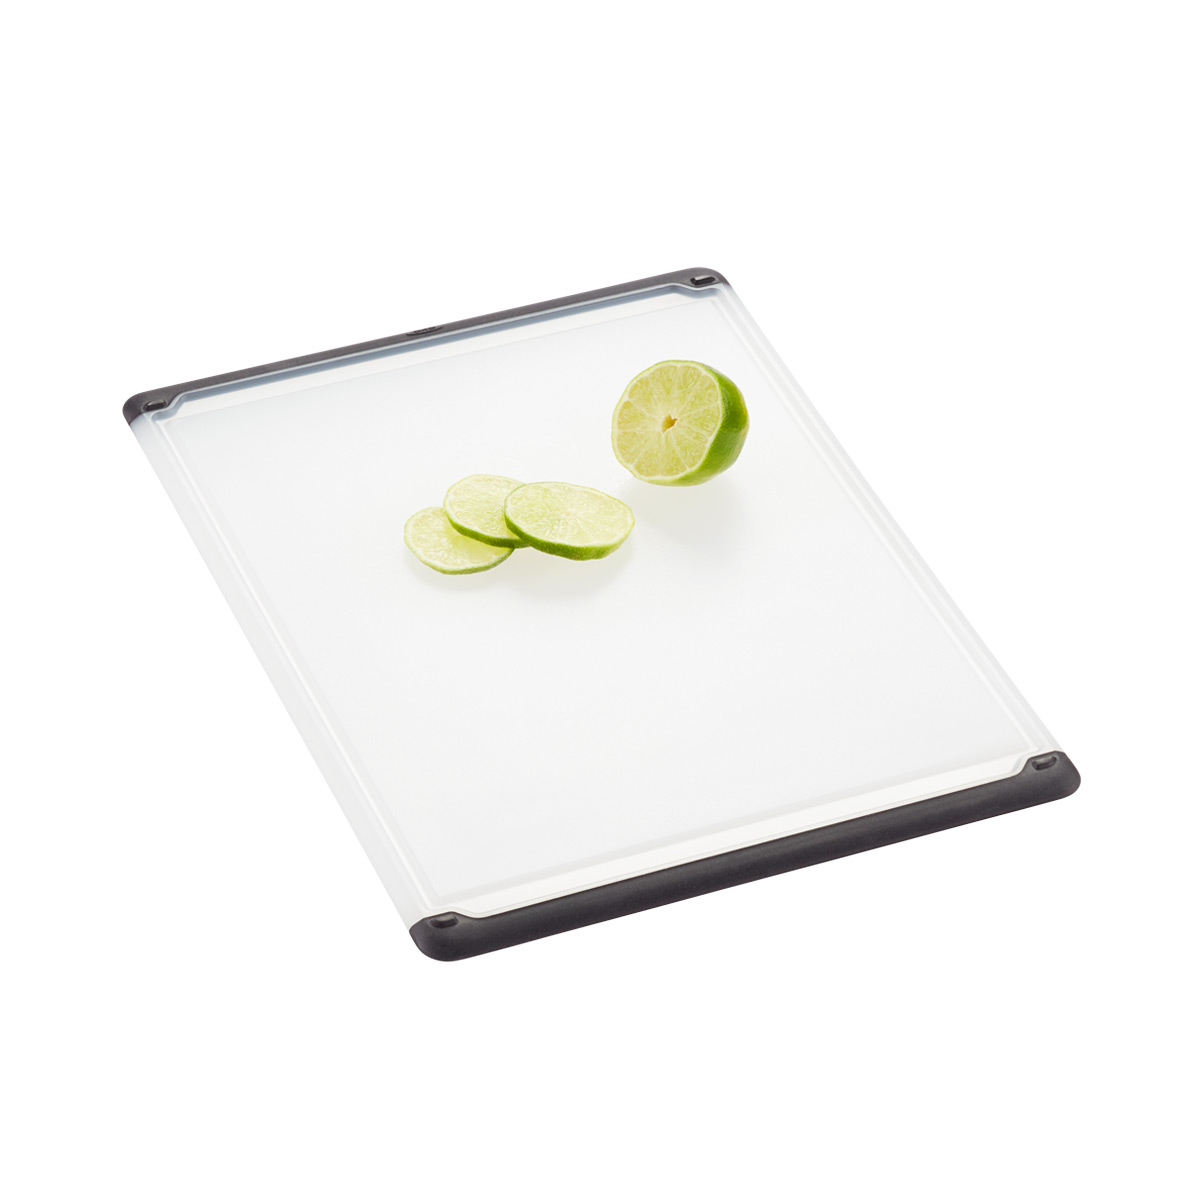 https://www.containerstore.com/catalogimages/332390/10073554g-oxo-cutting-board.jpg